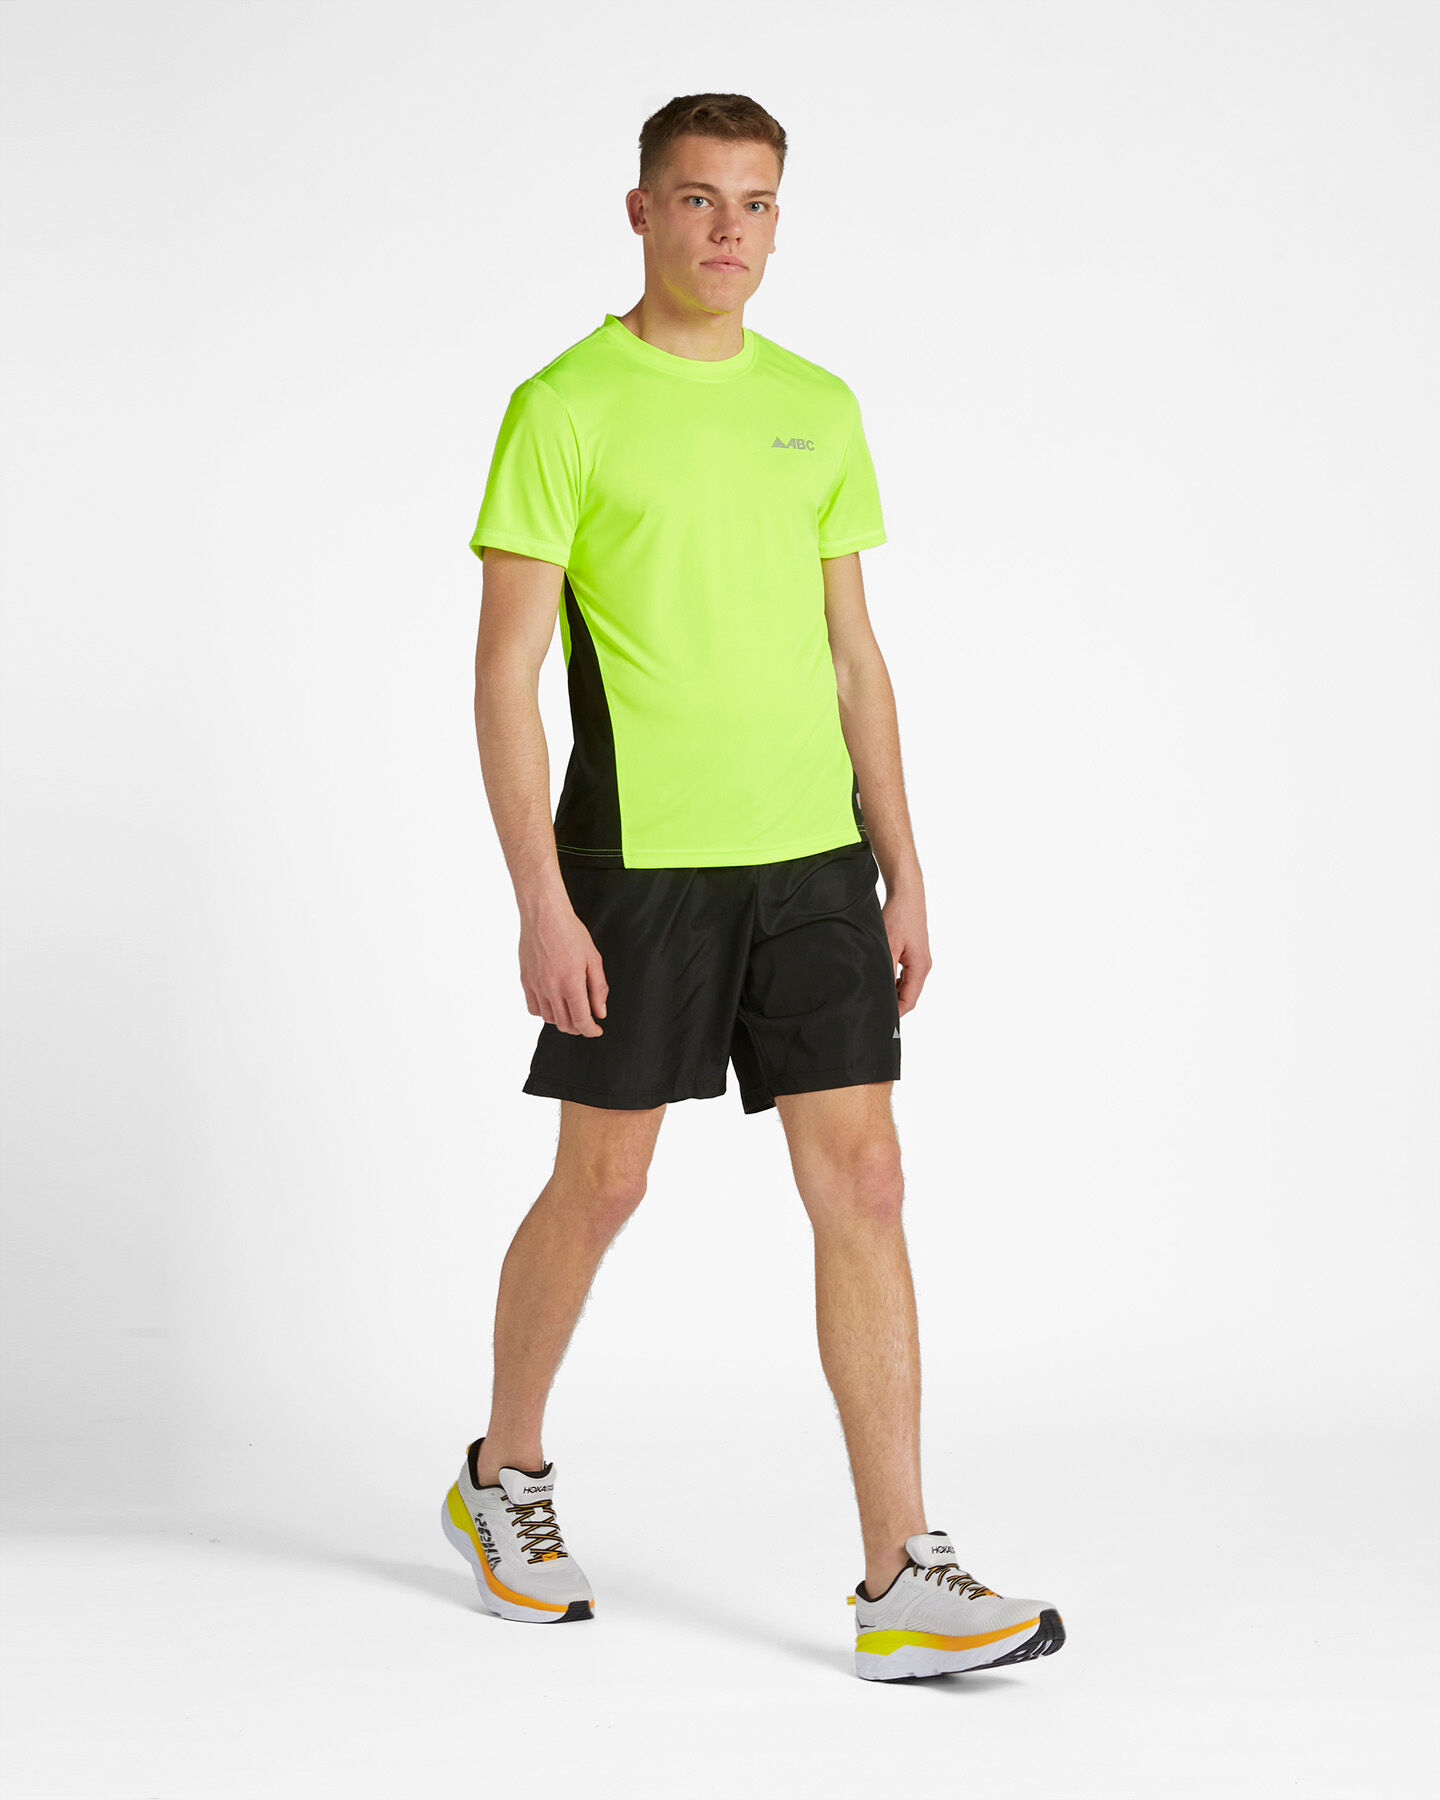  T-Shirt running ABC TECH M S4102013|1000/050|S scatto 3